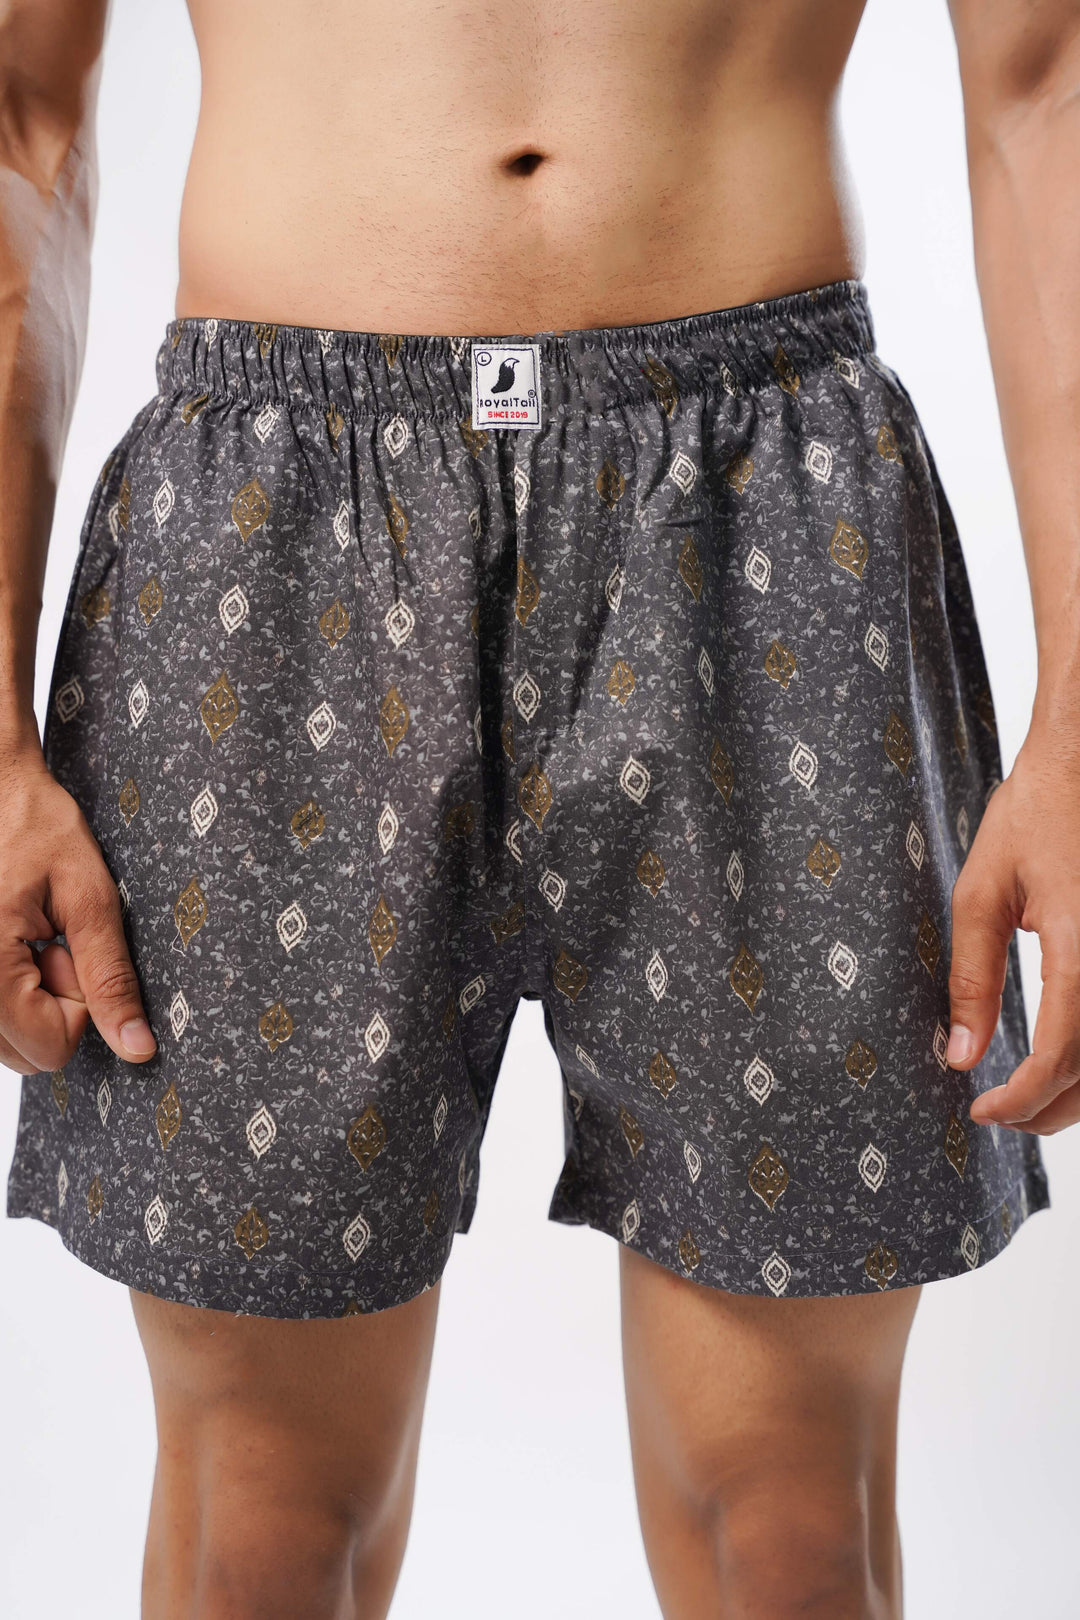 GREY ALL OVER PRINTED MENS BOXERS